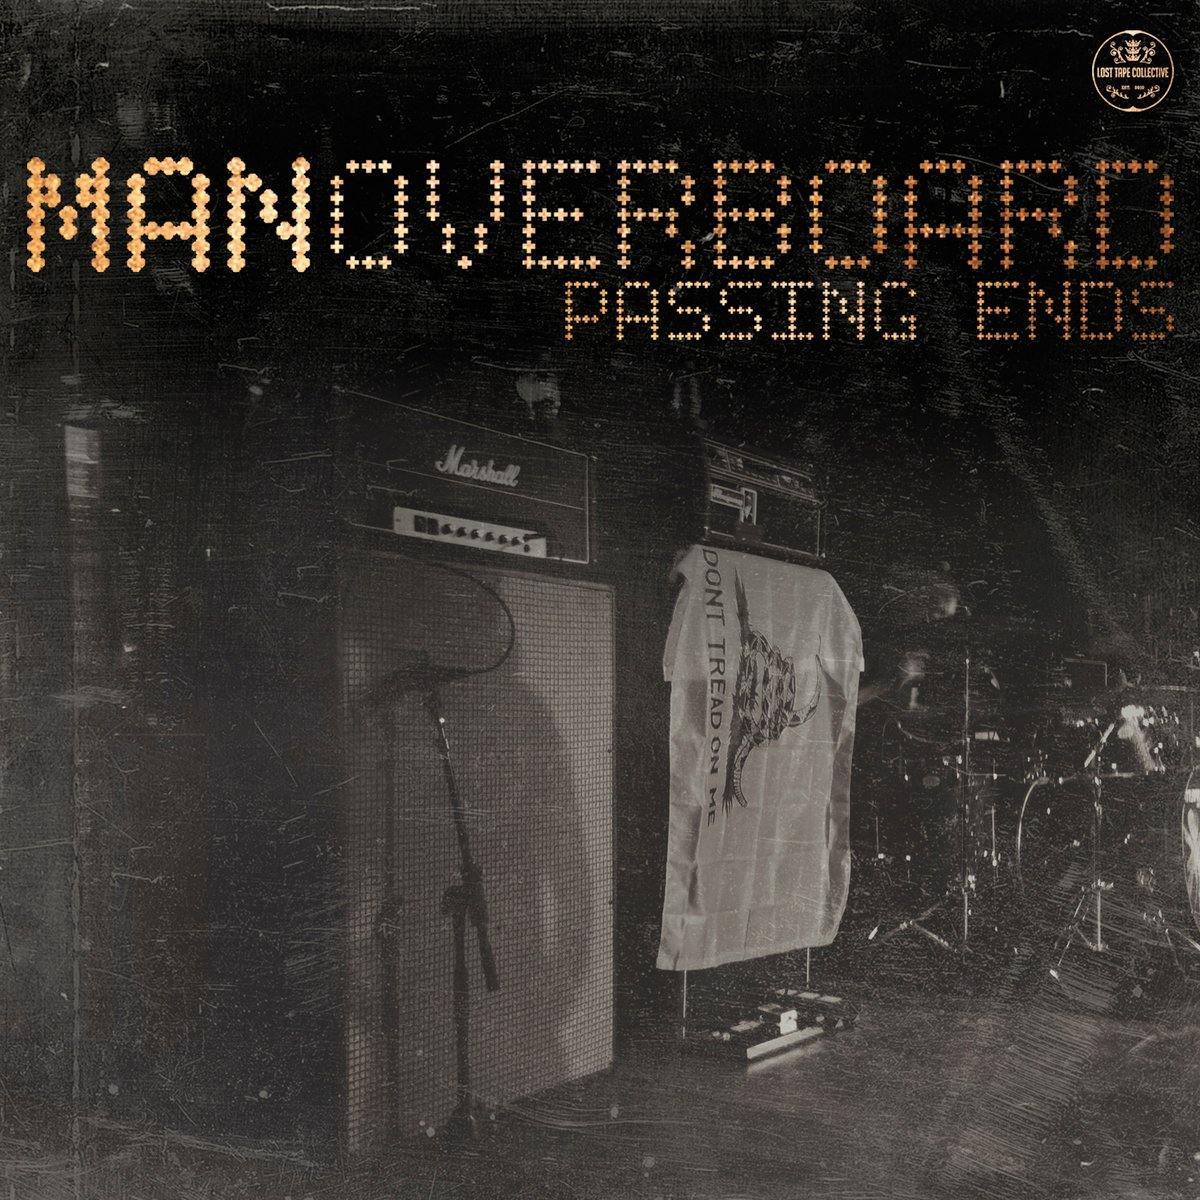 Buy – Man Overboard "Passing Ends" CD – Band & Music Merch – Cold Cuts Merch